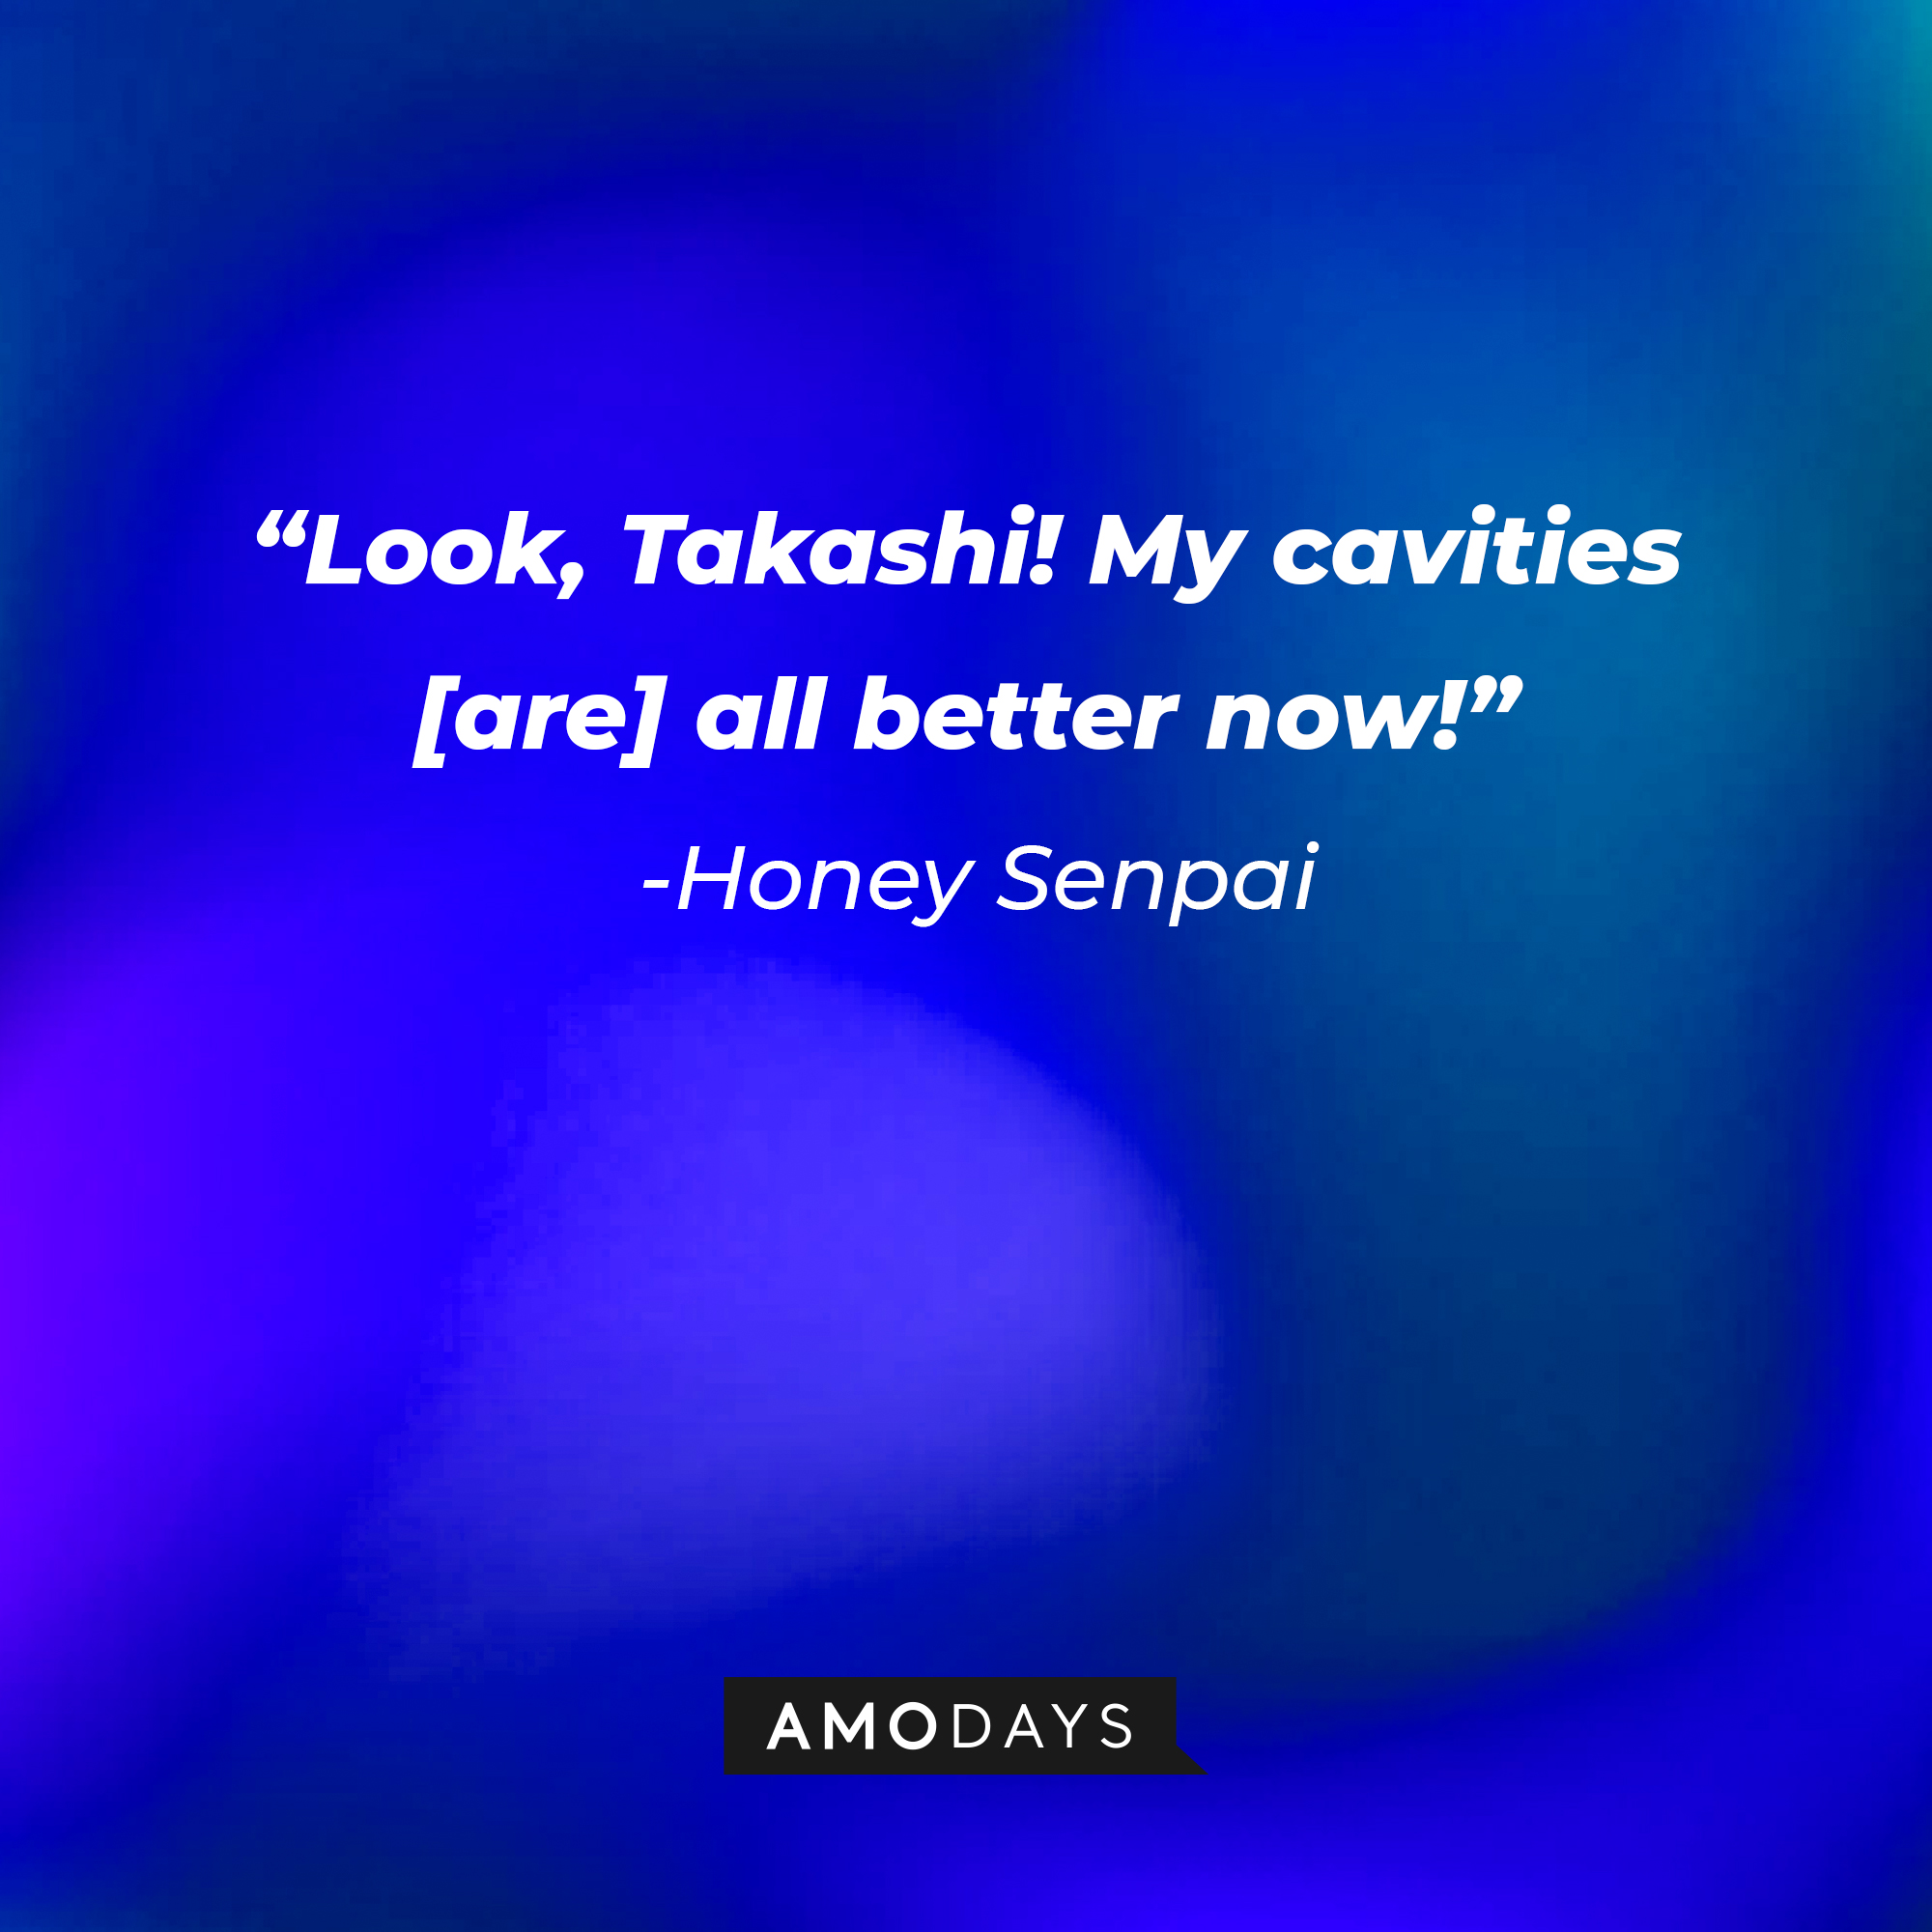 Honey Senpai’s quote: “Look, Takashi! My cavities [are] all better now!” | Source: AmoDays